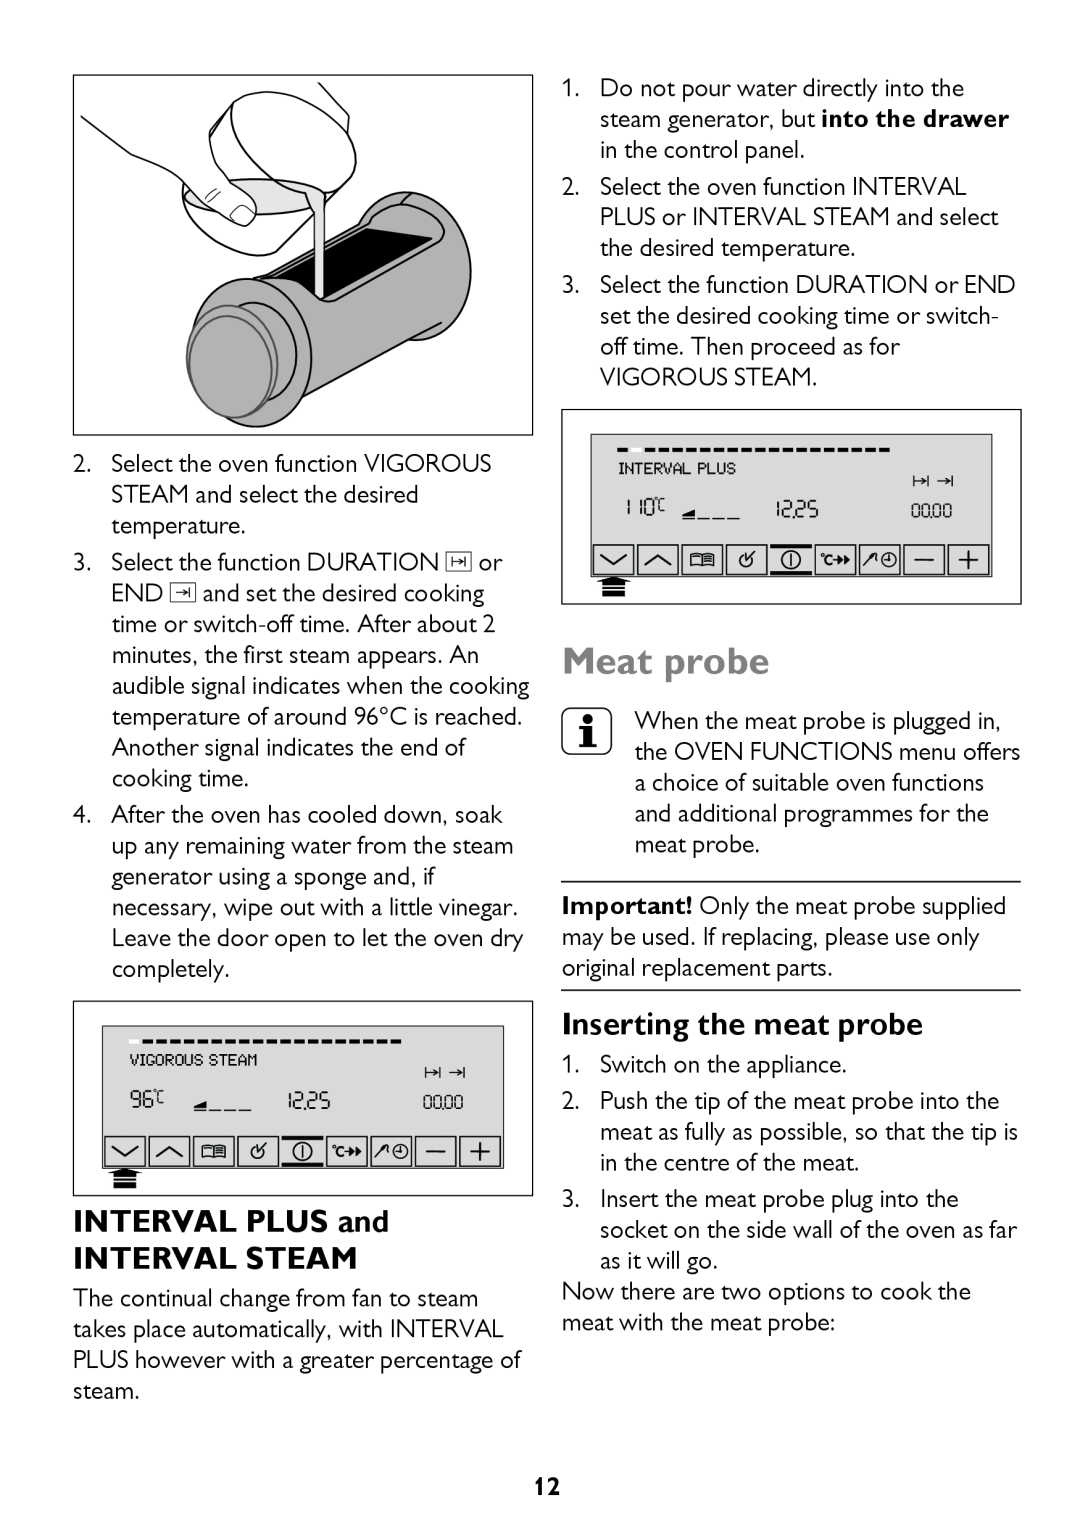 John Lewis JLBIOS610 instruction manual Meat probe, INTERVAL PLUS and INTERVAL STEAM, Inserting the meat probe 